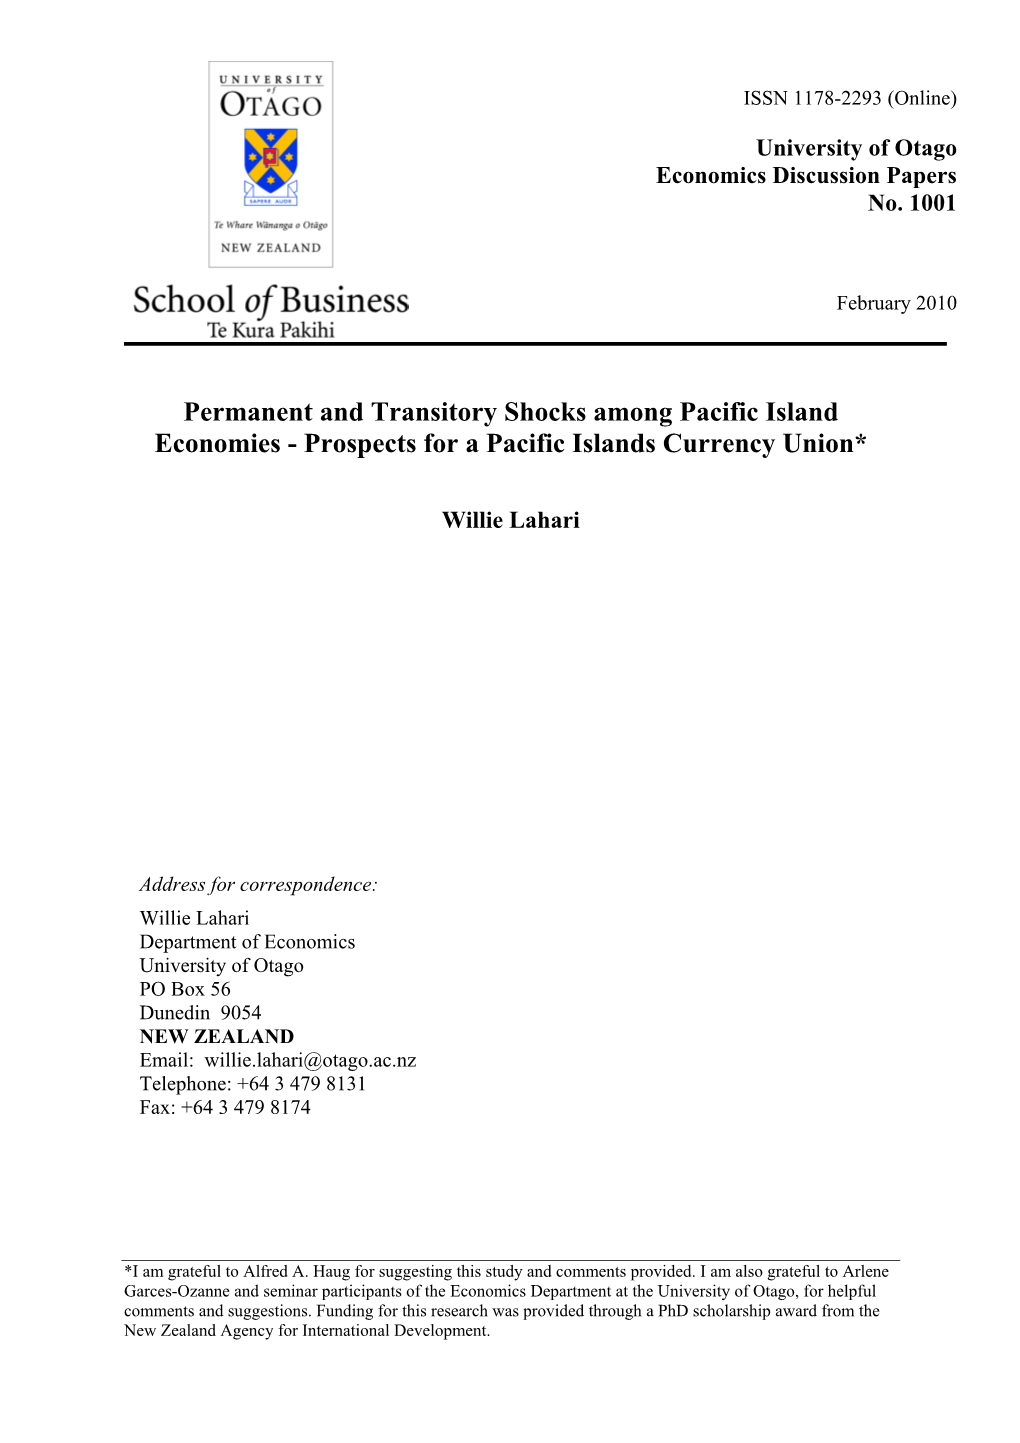 Permanent and Transitory Shocks Among Pacific Island Economies - Prospects for a Pacific Islands Currency Union*